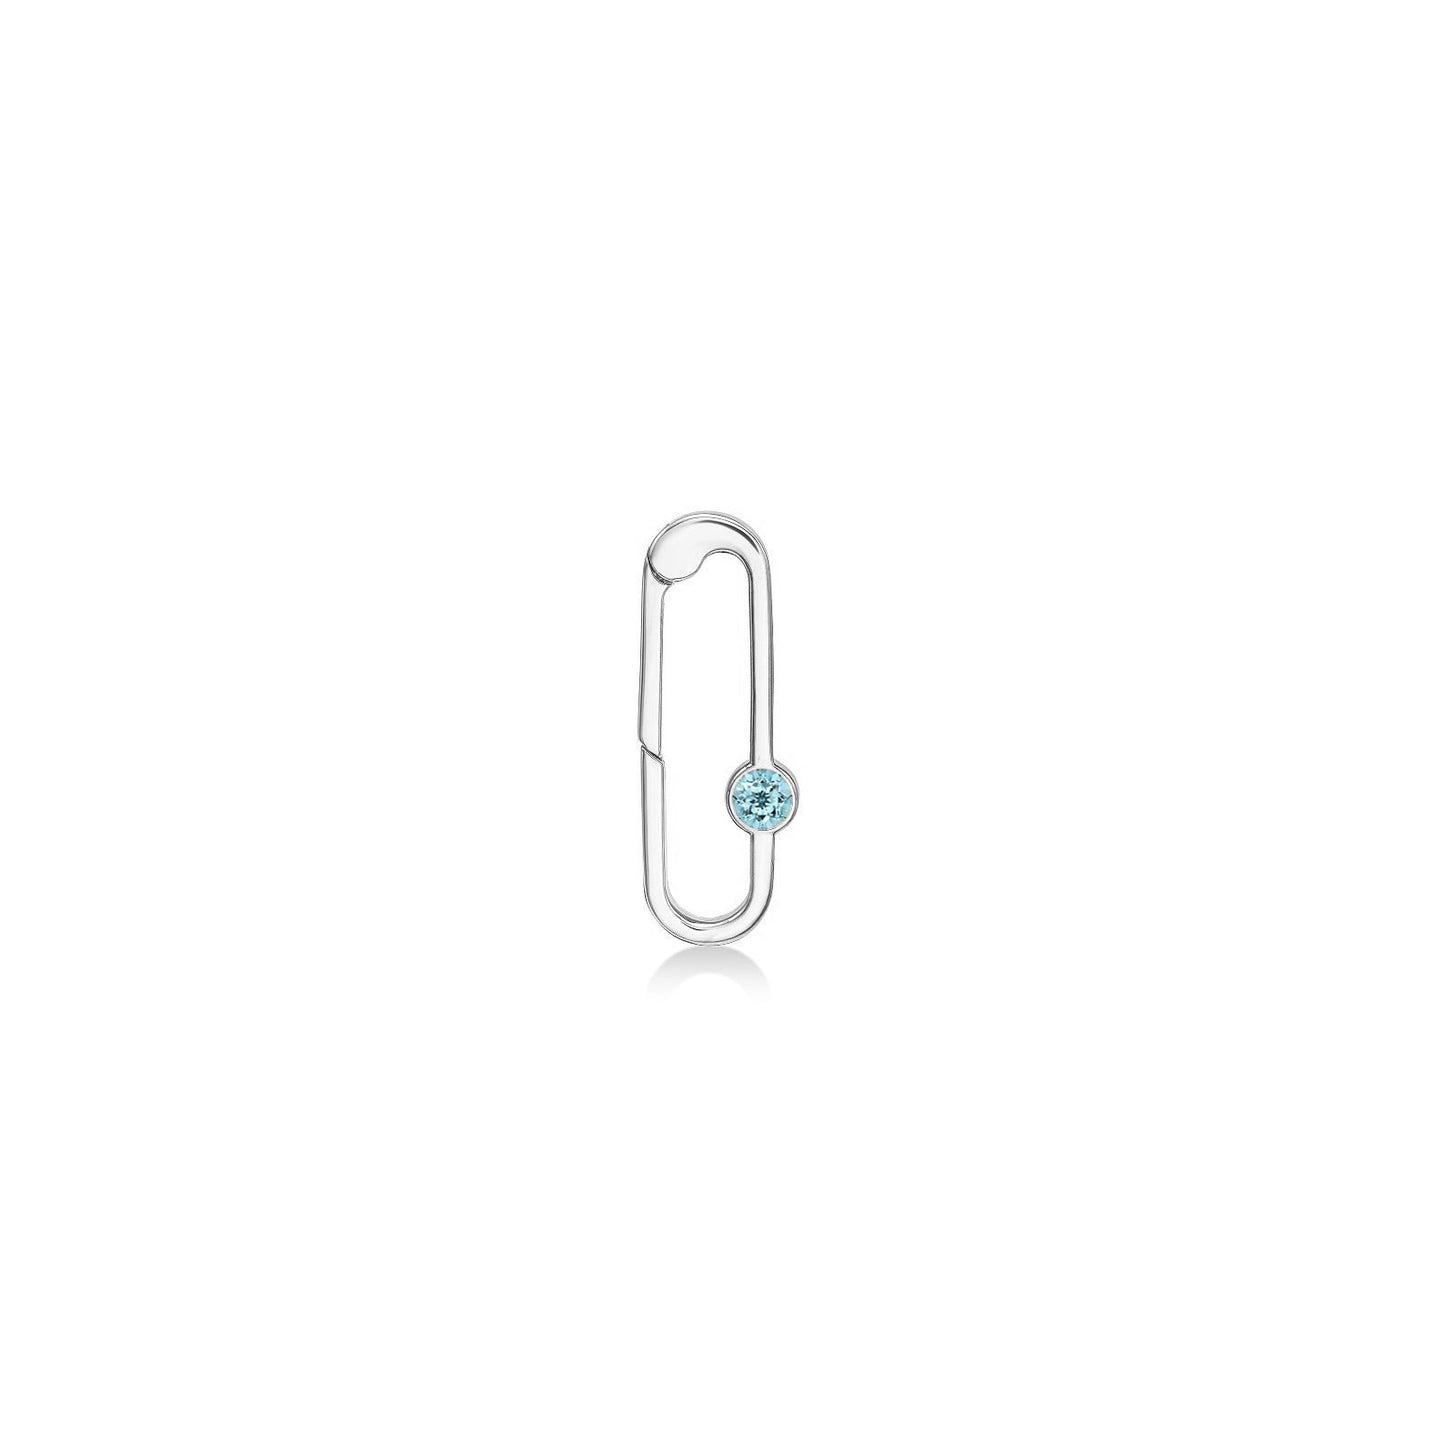 14k white gold paperclip charm lock with aquamarine